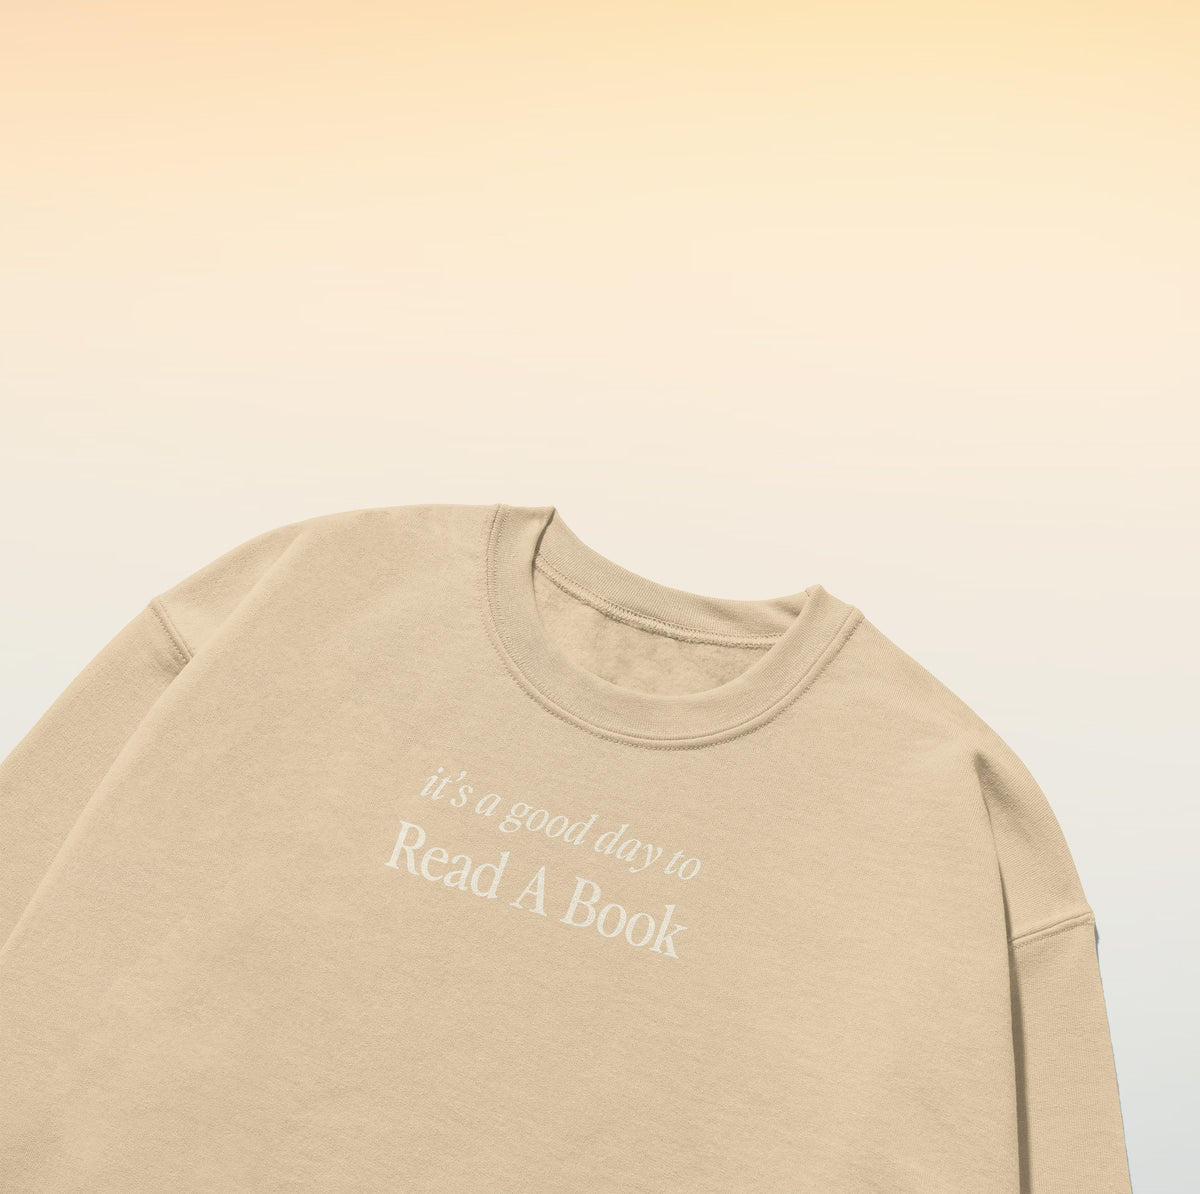 It's a Good Day to Read a Book Sweatshirt